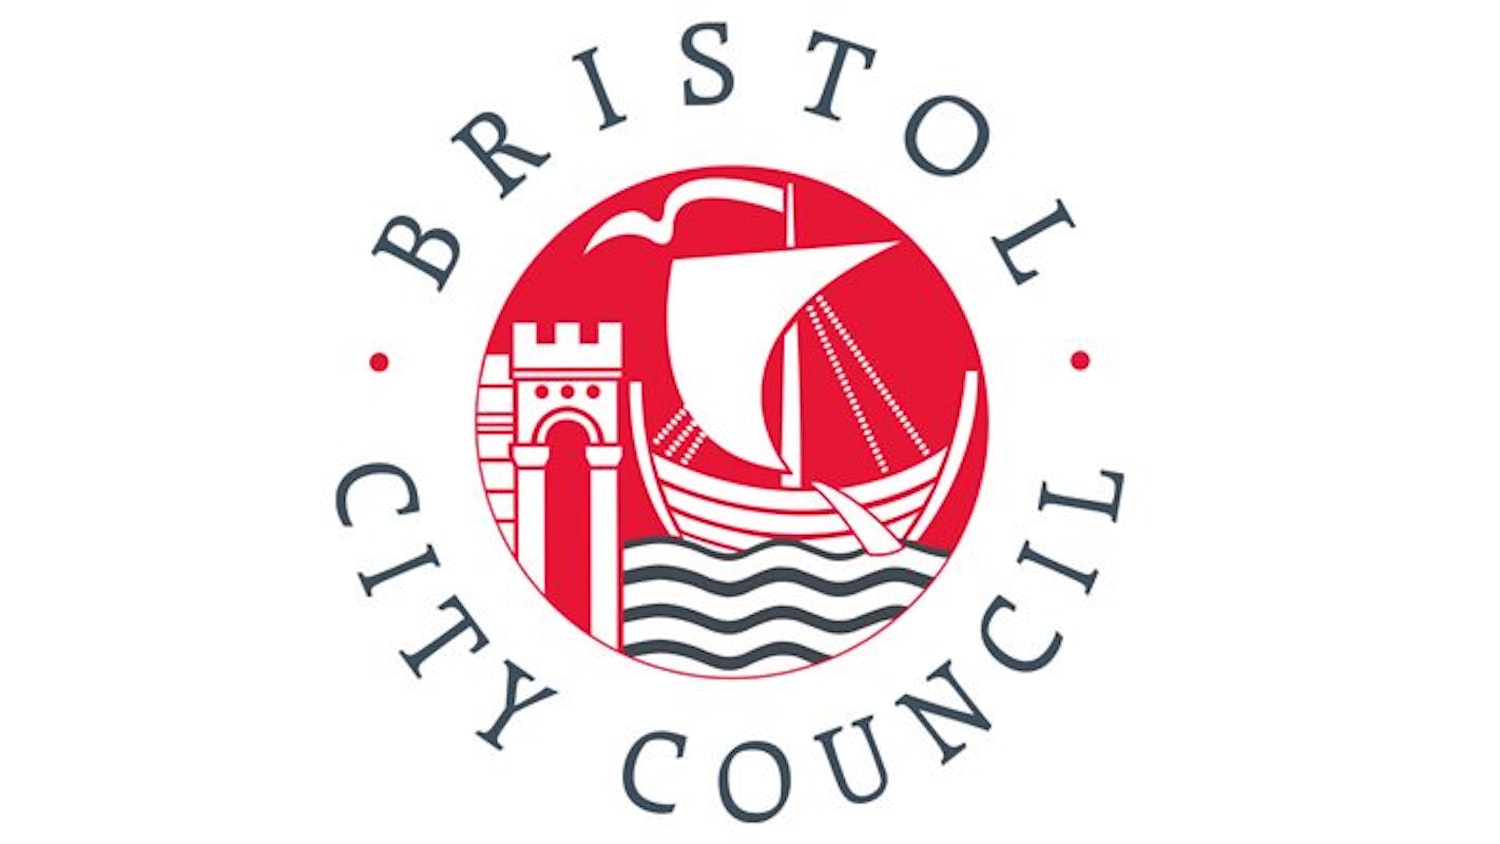 Ask Bristol Consultation and Engagement Hub